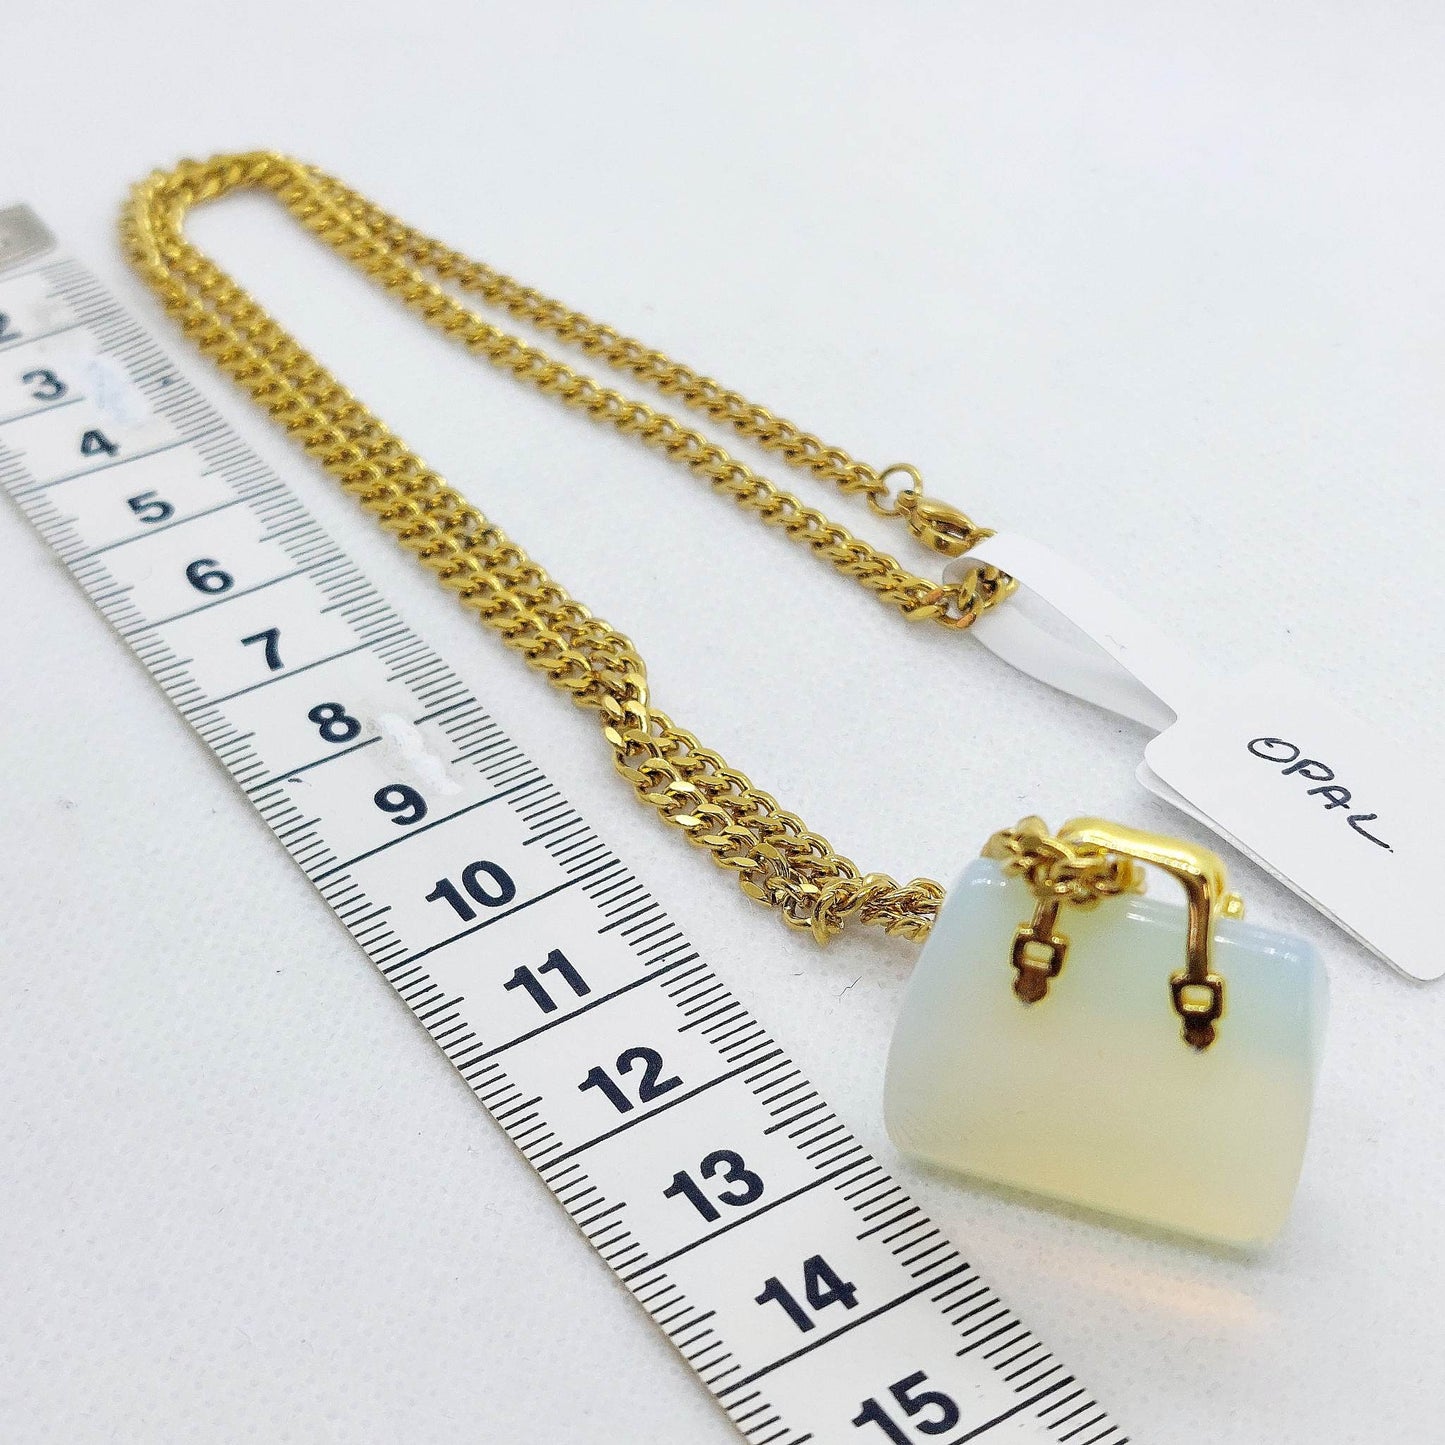 Natural Opal Handbag Pendant - Stainless Steel Gold Plated Chain Necklace